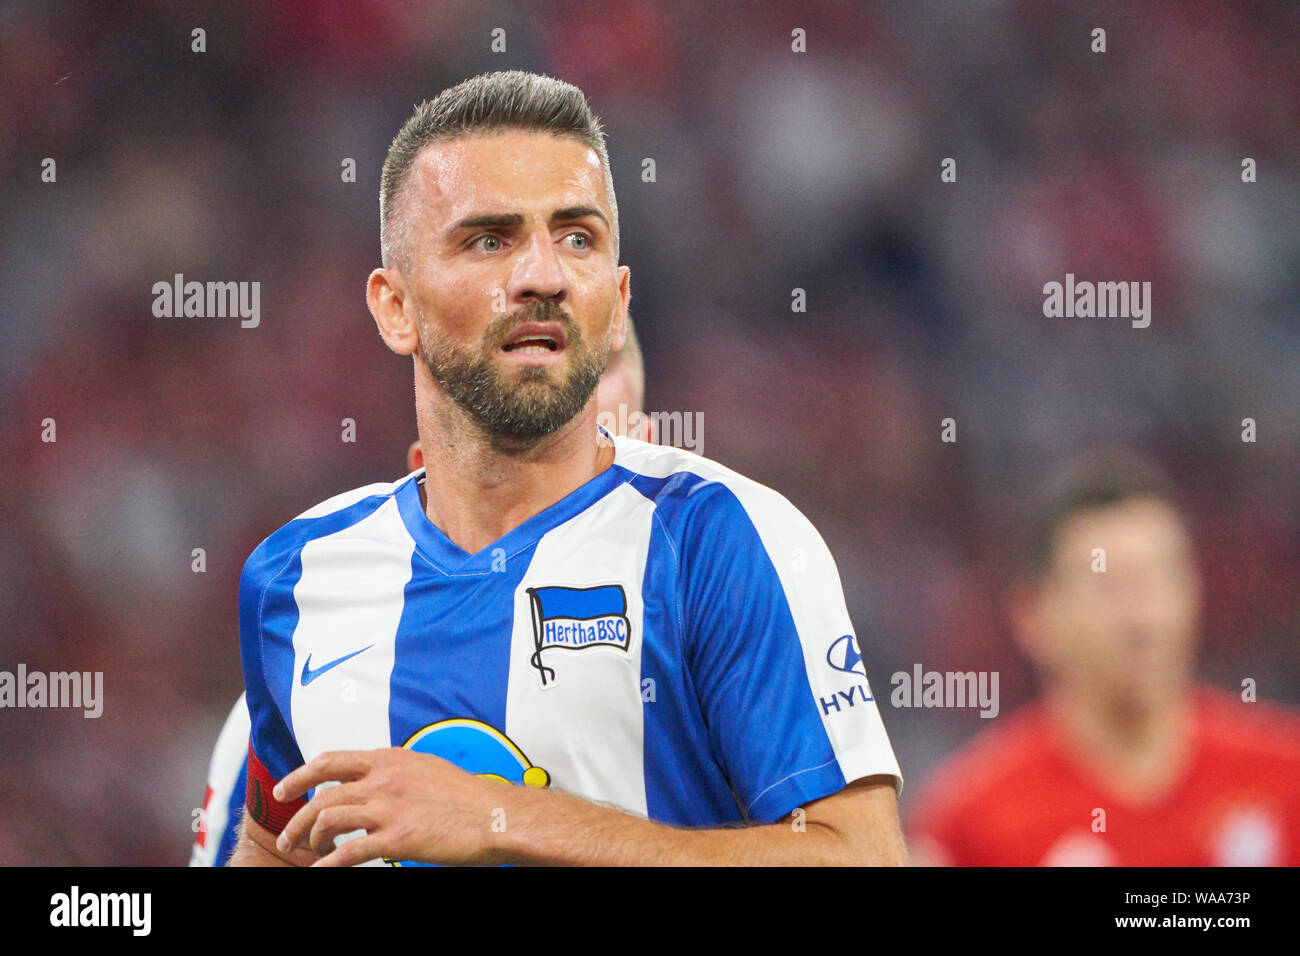 Vedad IBISEVIC, Hertha 19  half-size, portrait,  FC BAYERN MUNICH - HERTHA BSC BERLIN 2-2  - DFL REGULATIONS PROHIBIT ANY USE OF PHOTOGRAPHS as IMAGE SEQUENCES and/or QUASI-VIDEO -  1.German Soccer League , Munich, August 16, 2019  Season 2019/2020, matchday 01, FCB, München © Peter Schatz / Alamy Live News Stock Photo